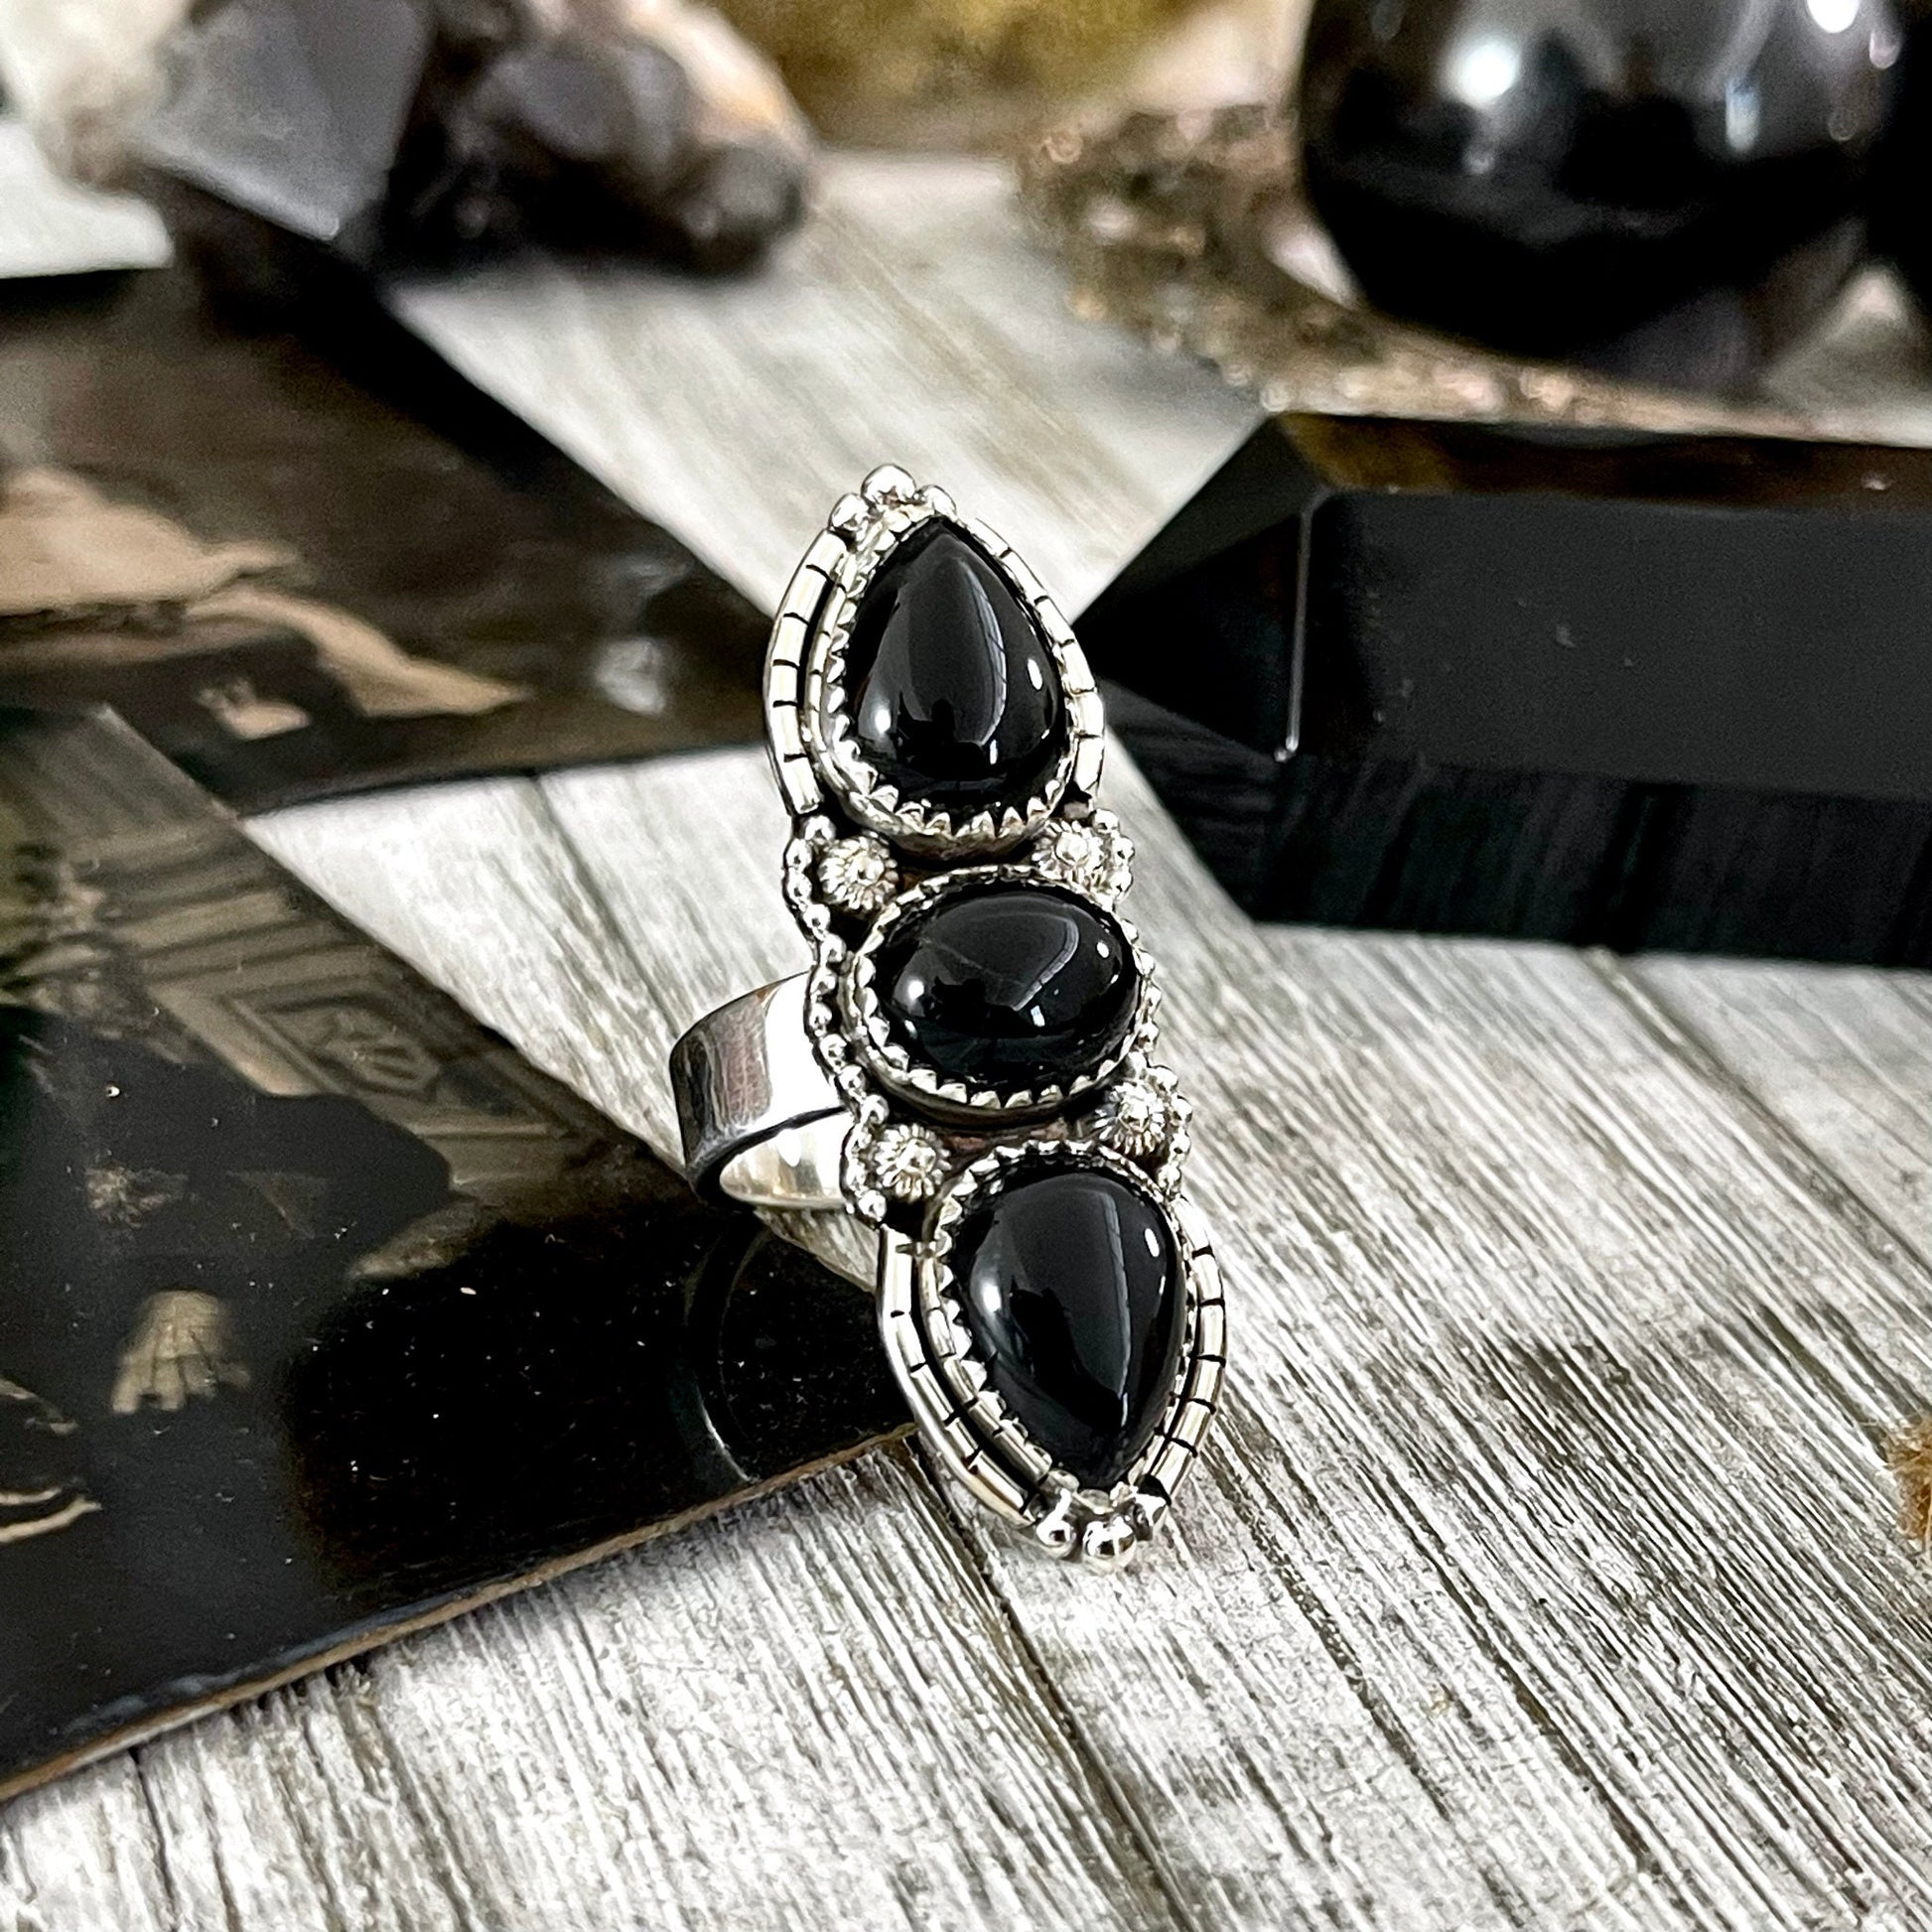 3 Stone Ring, Big Stone Ring, Black Onyx Ring, Black Stone Ring, Bohemian Ring, Boho Jewelry, Crystal Ring, Etsy Id 1078476885, Festival Jewelry, Foxlark Alchemy, Foxlark- Rings, Gift For Woman, Jewelry, Rings, Statement Rings, Wholesale